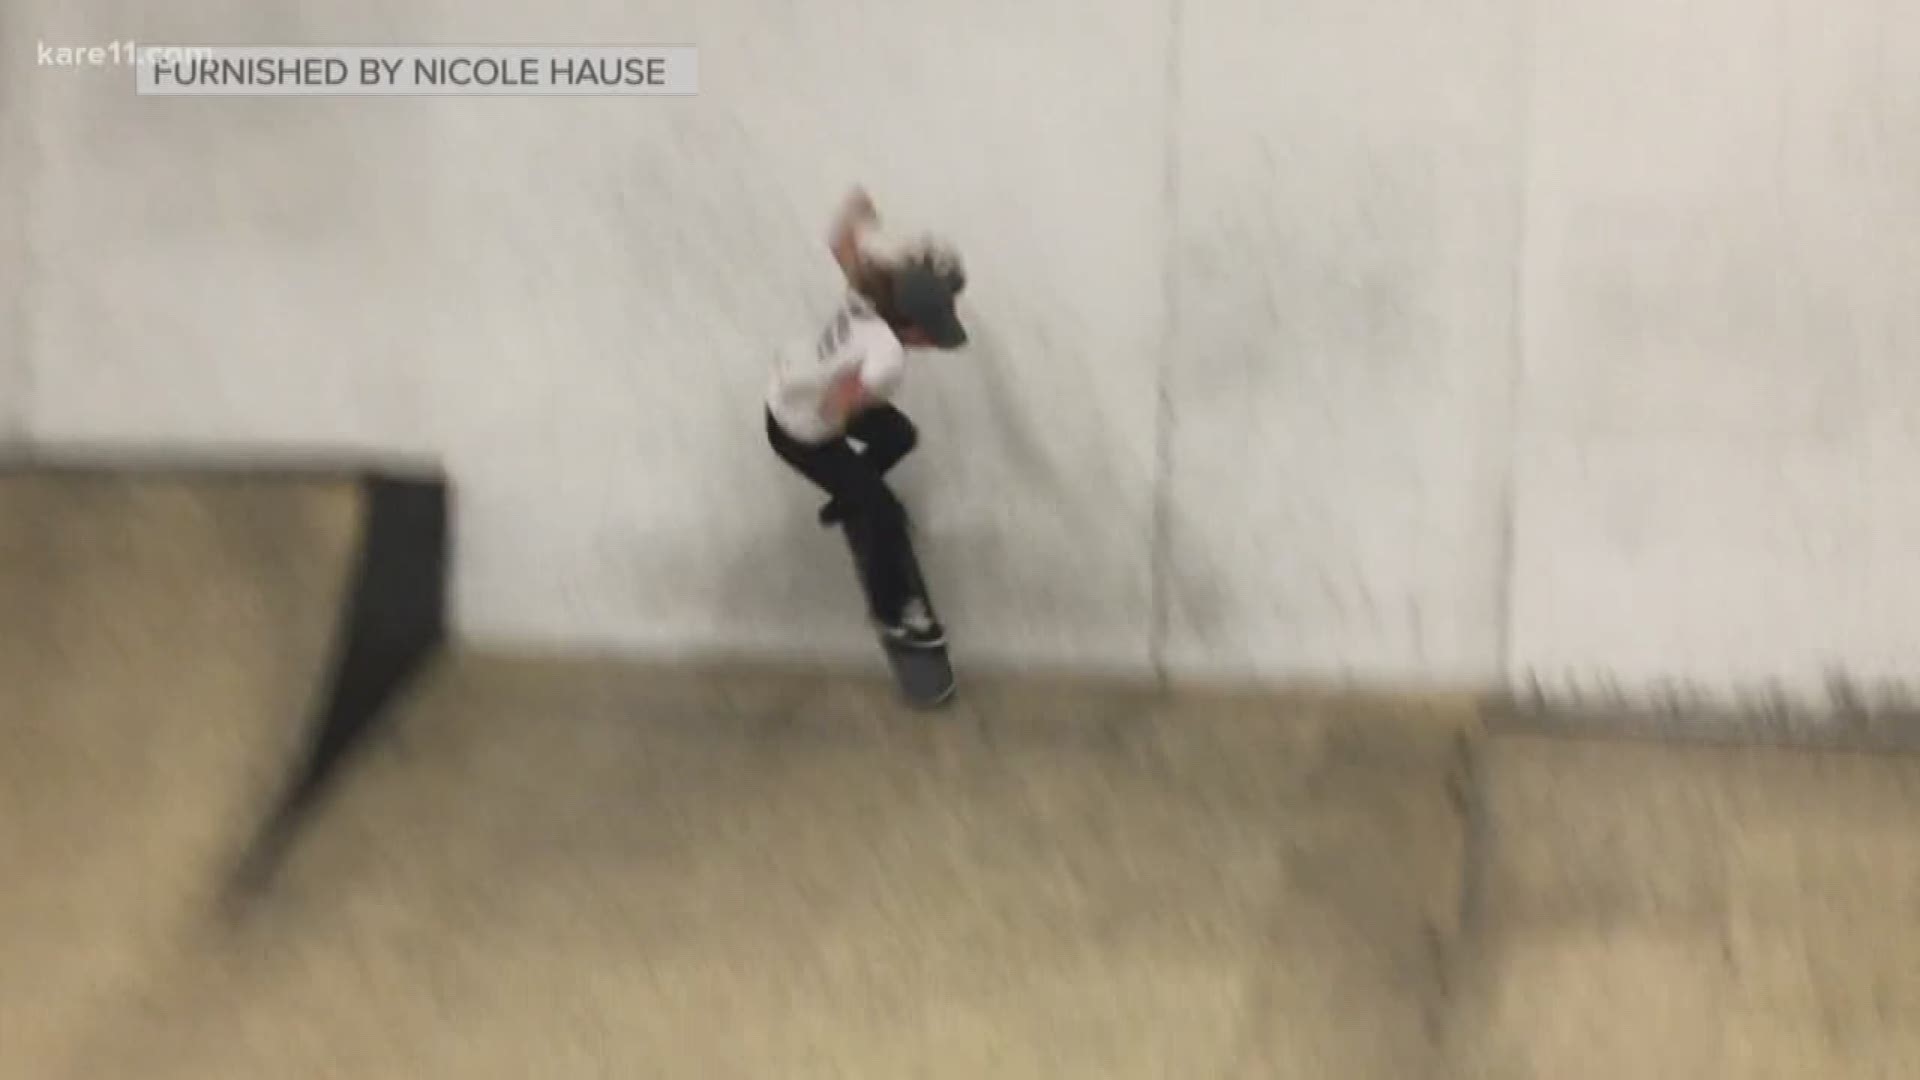 Stillwater native and X Games skateboarder Nicole Hause will be the Grand Marshal of the 2018 CenterPoint Energy Torchlight Parade on Wednesday night in downtown Minneapolis. She shares some info about the upcoming Aquatennial. https://kare11.tv/2JwjgQo